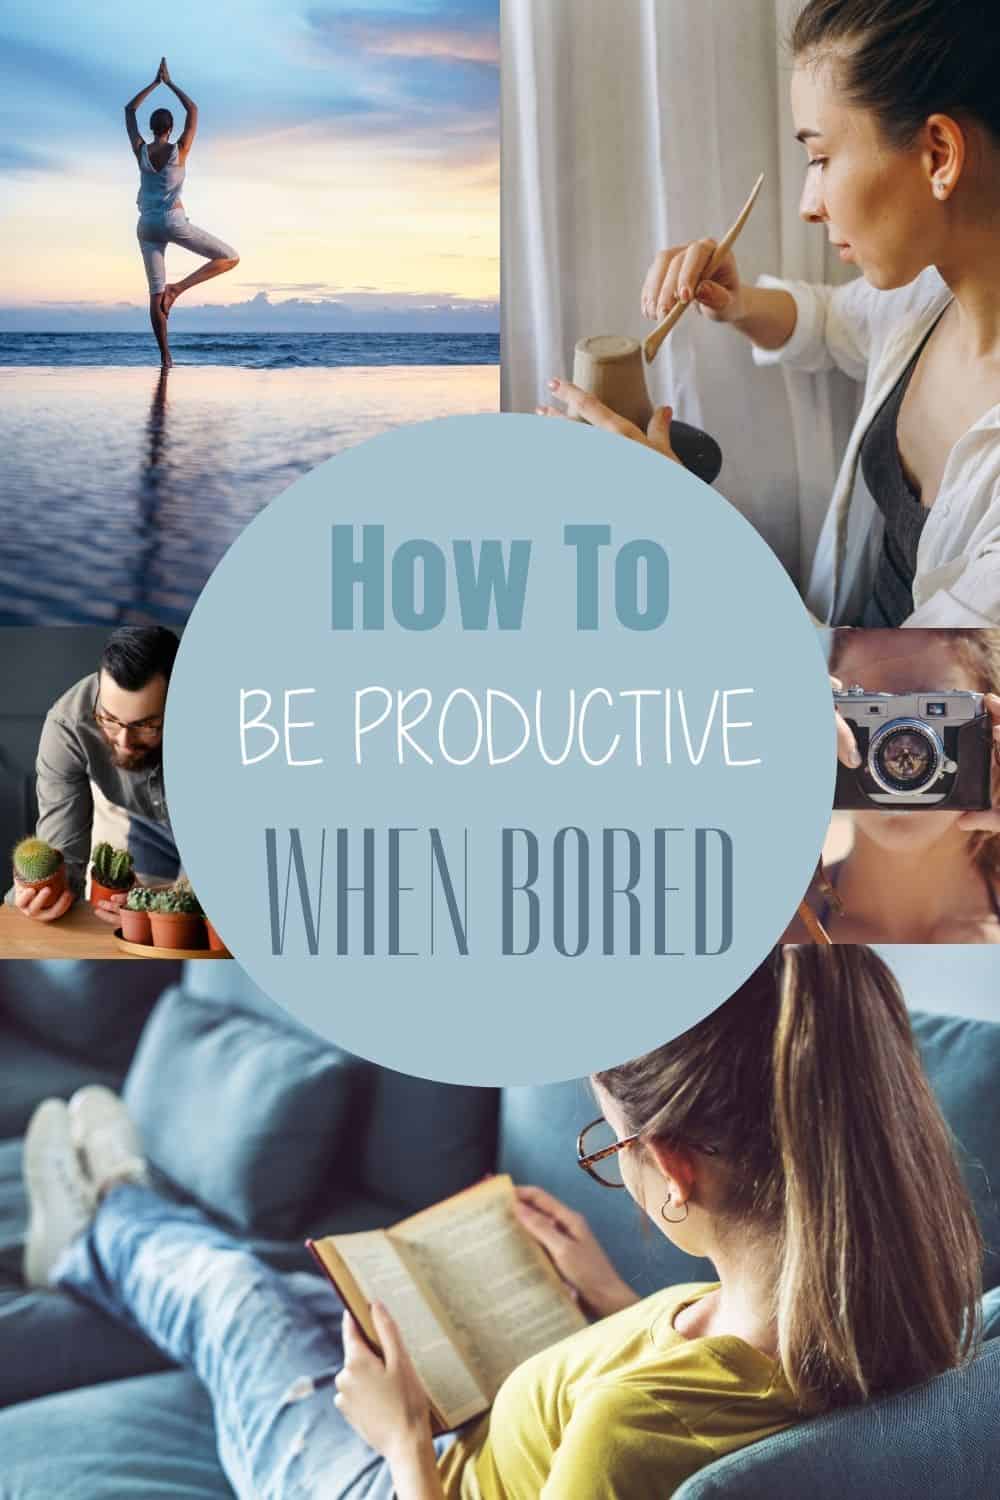 Time is precious, so free time should be utilized to its fullest. Here are 10 productive things to do the next time you find yourself bored.